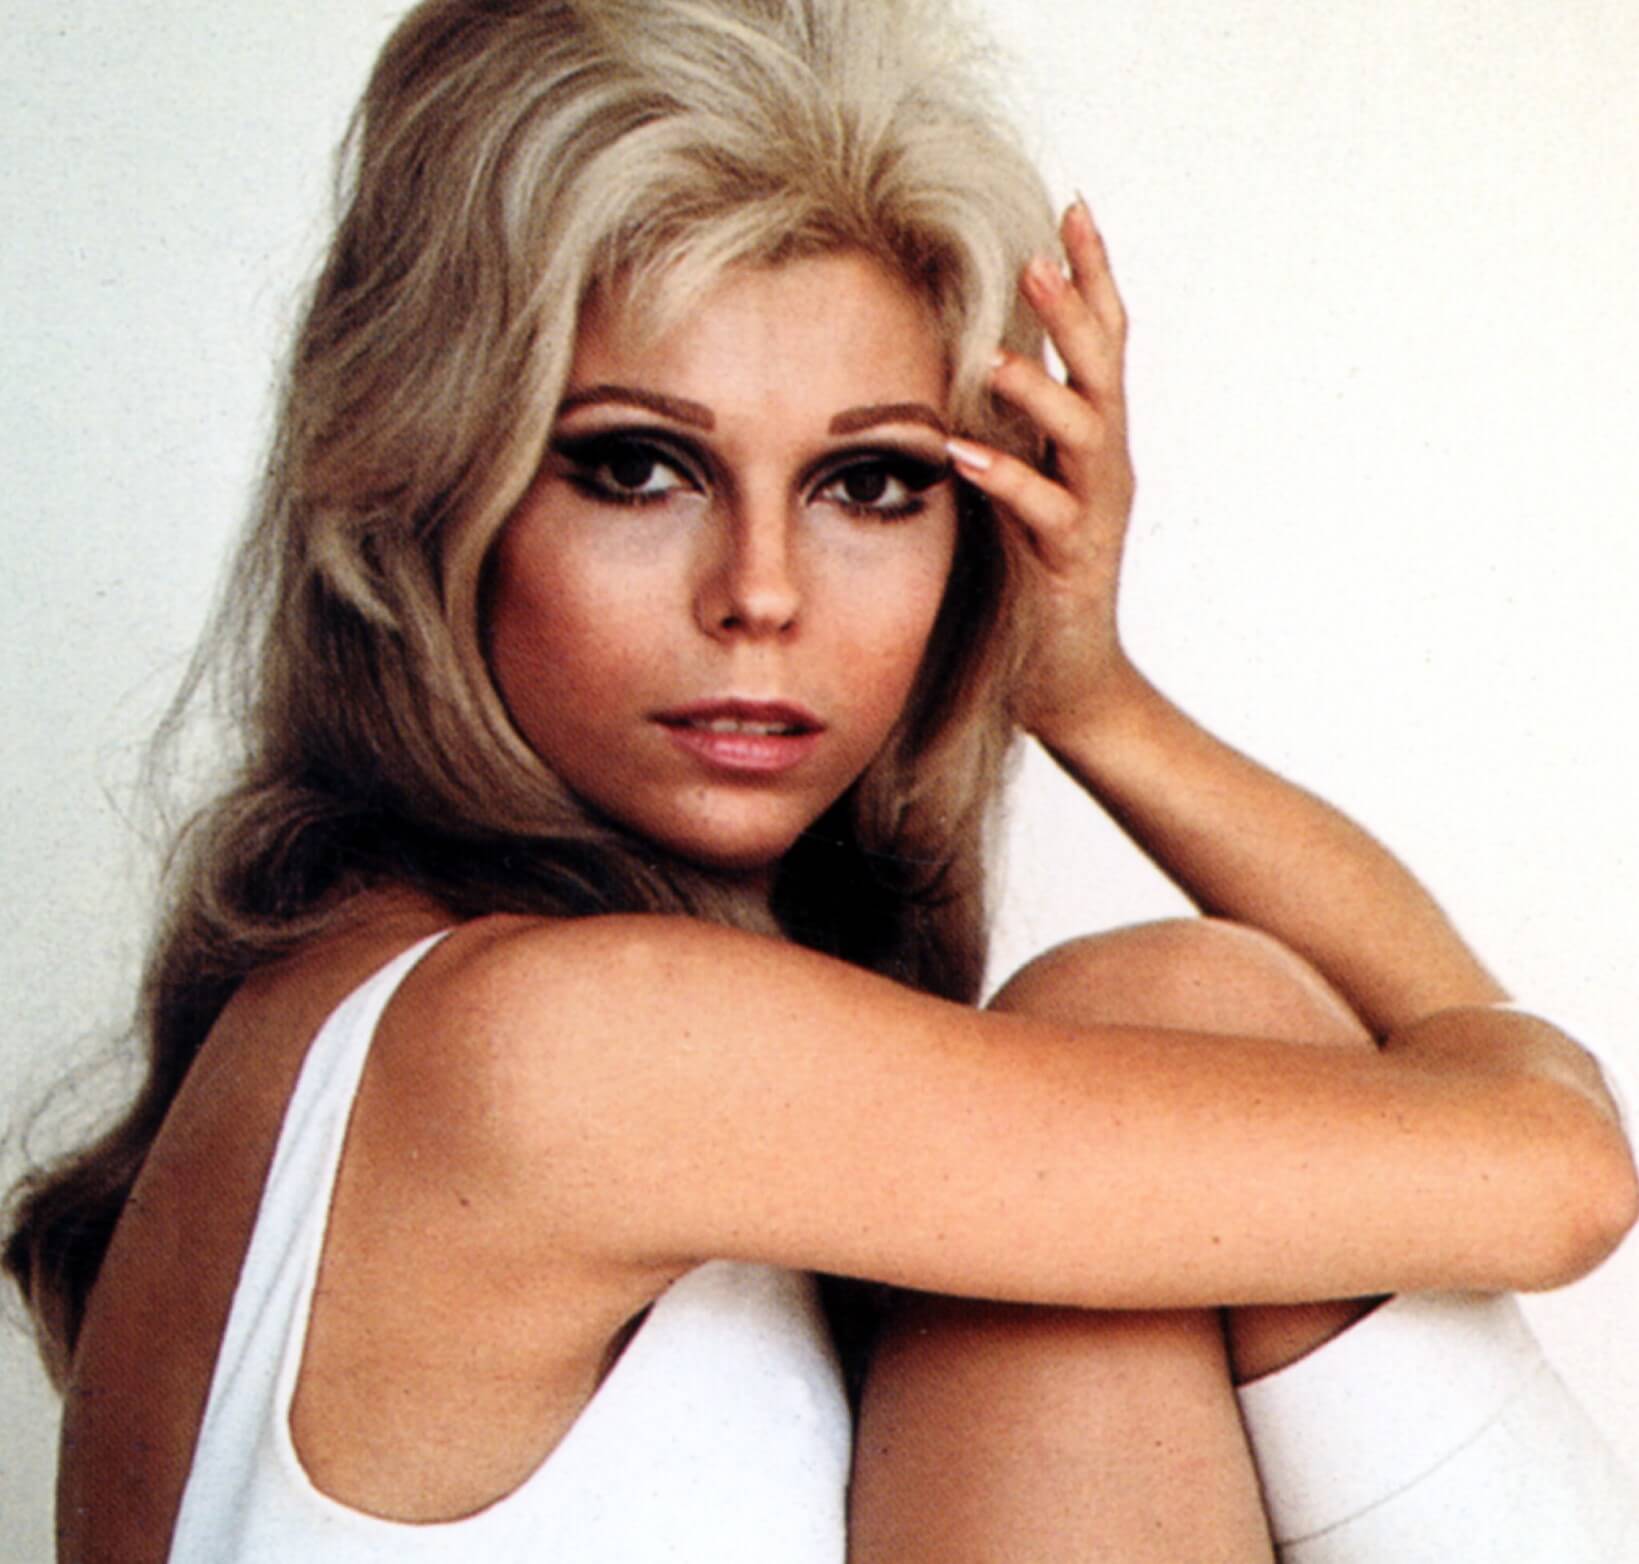 "These Boots Are Made for Walkin'" singer Nancy Sinatra wearing white